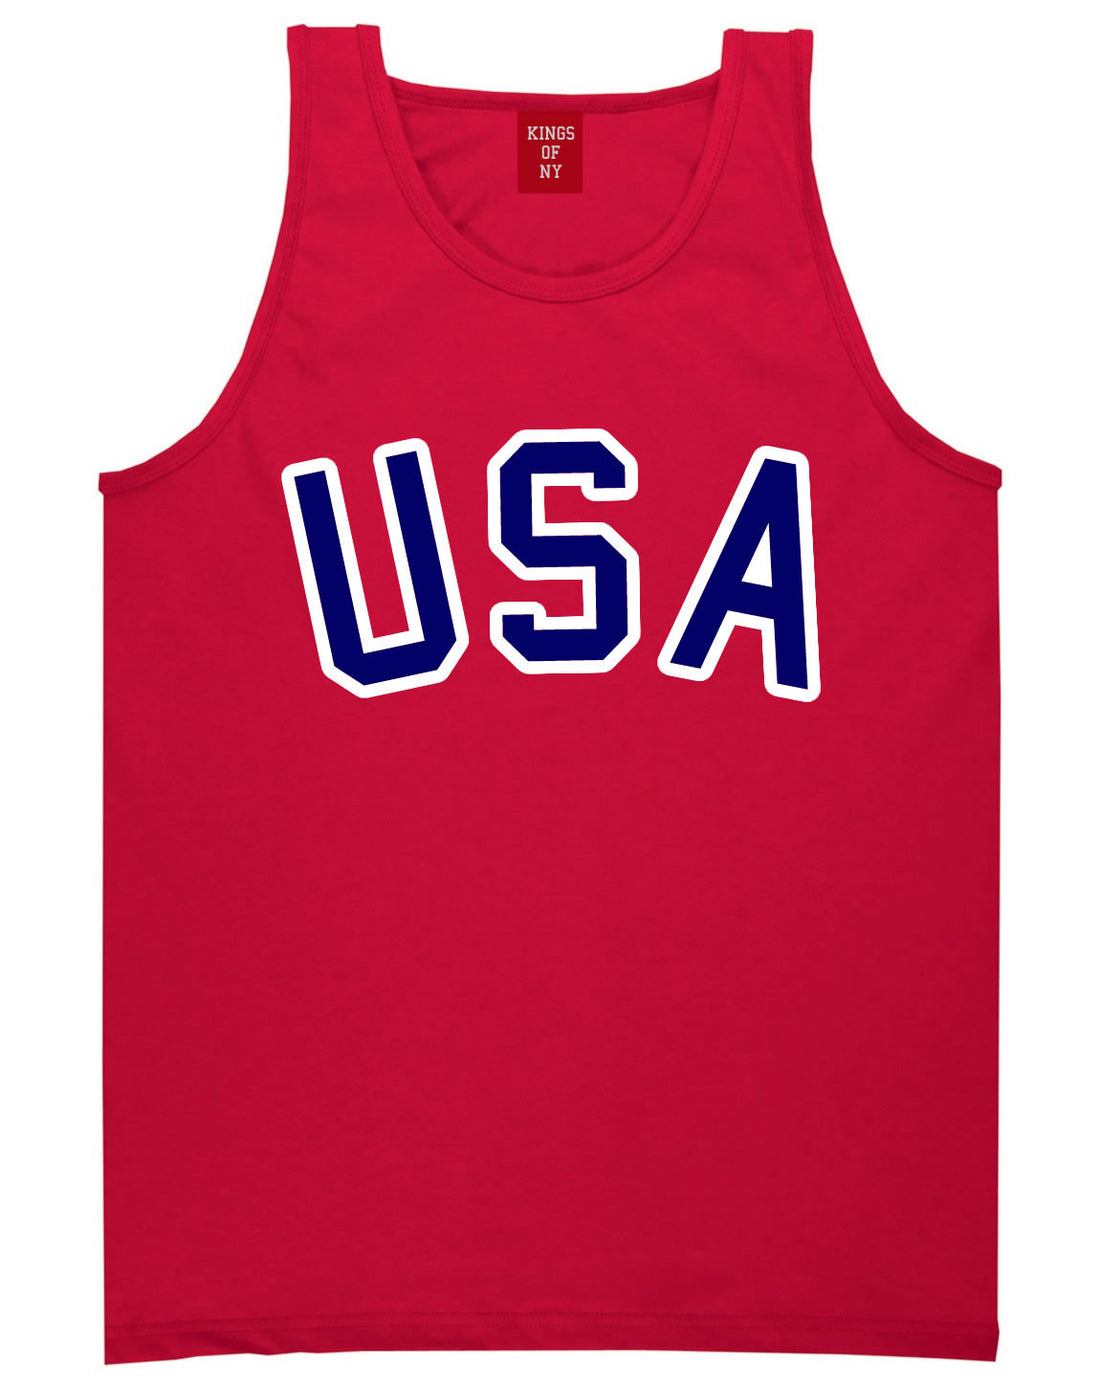 Team USA Olympics 2016 Tank Top in Red